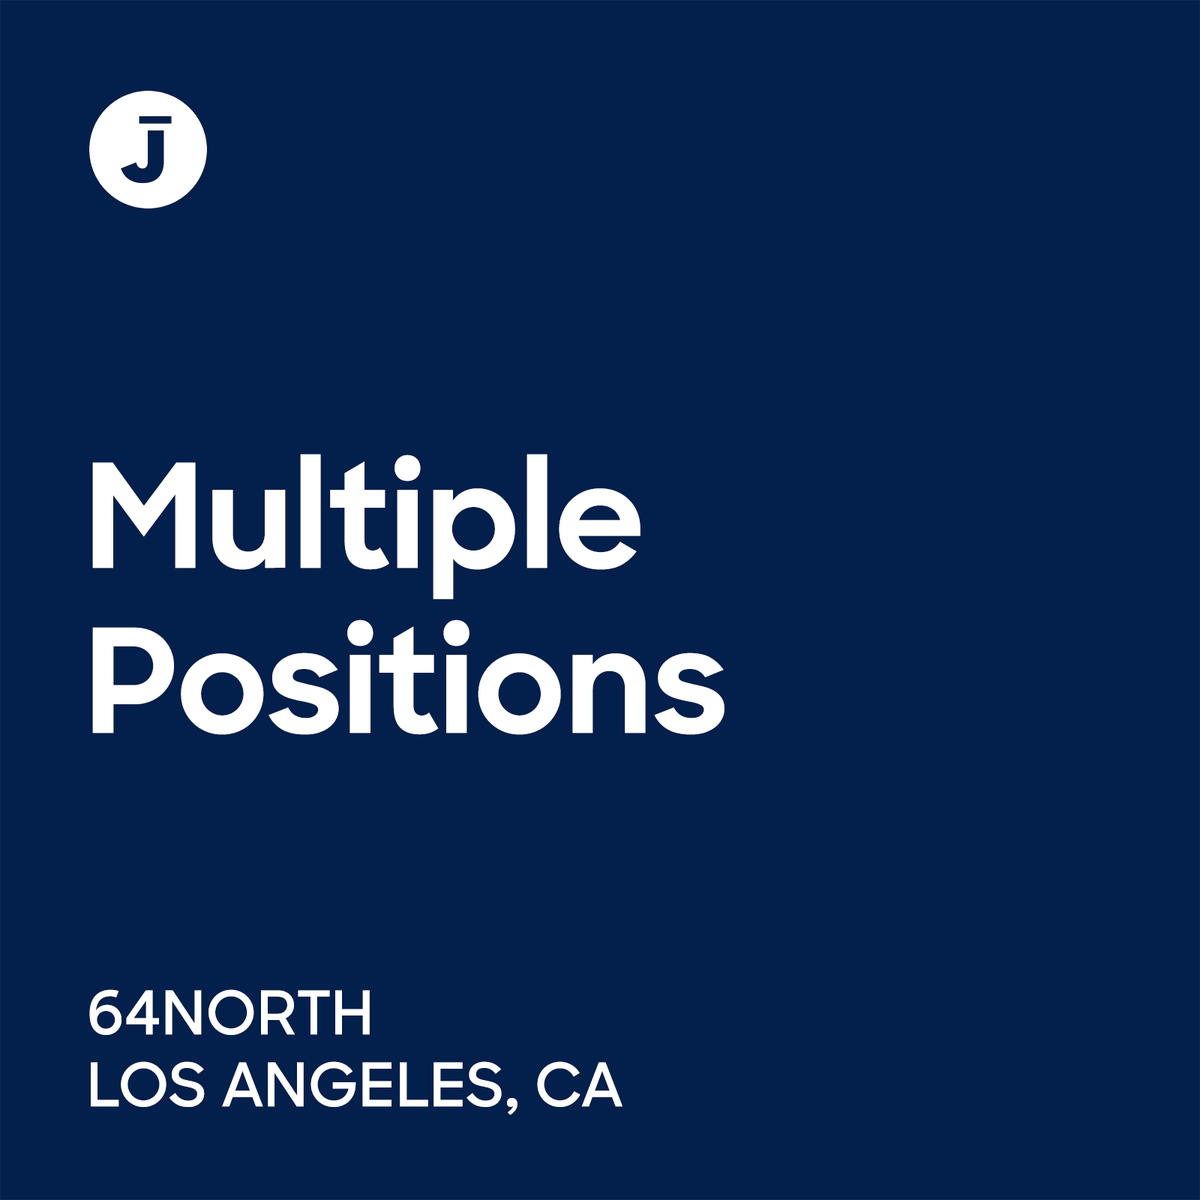 Today's Employer of the Day is 64North. They're currently hiring a Design/Technical Director, Junior Architect/Designer, and Senior Architect in Los Angeles.

archinect.com/64North

#ArchinectJobs #ArchinectEOTD #ArchitectureJobs #LosAngelesJobs #LAJobs